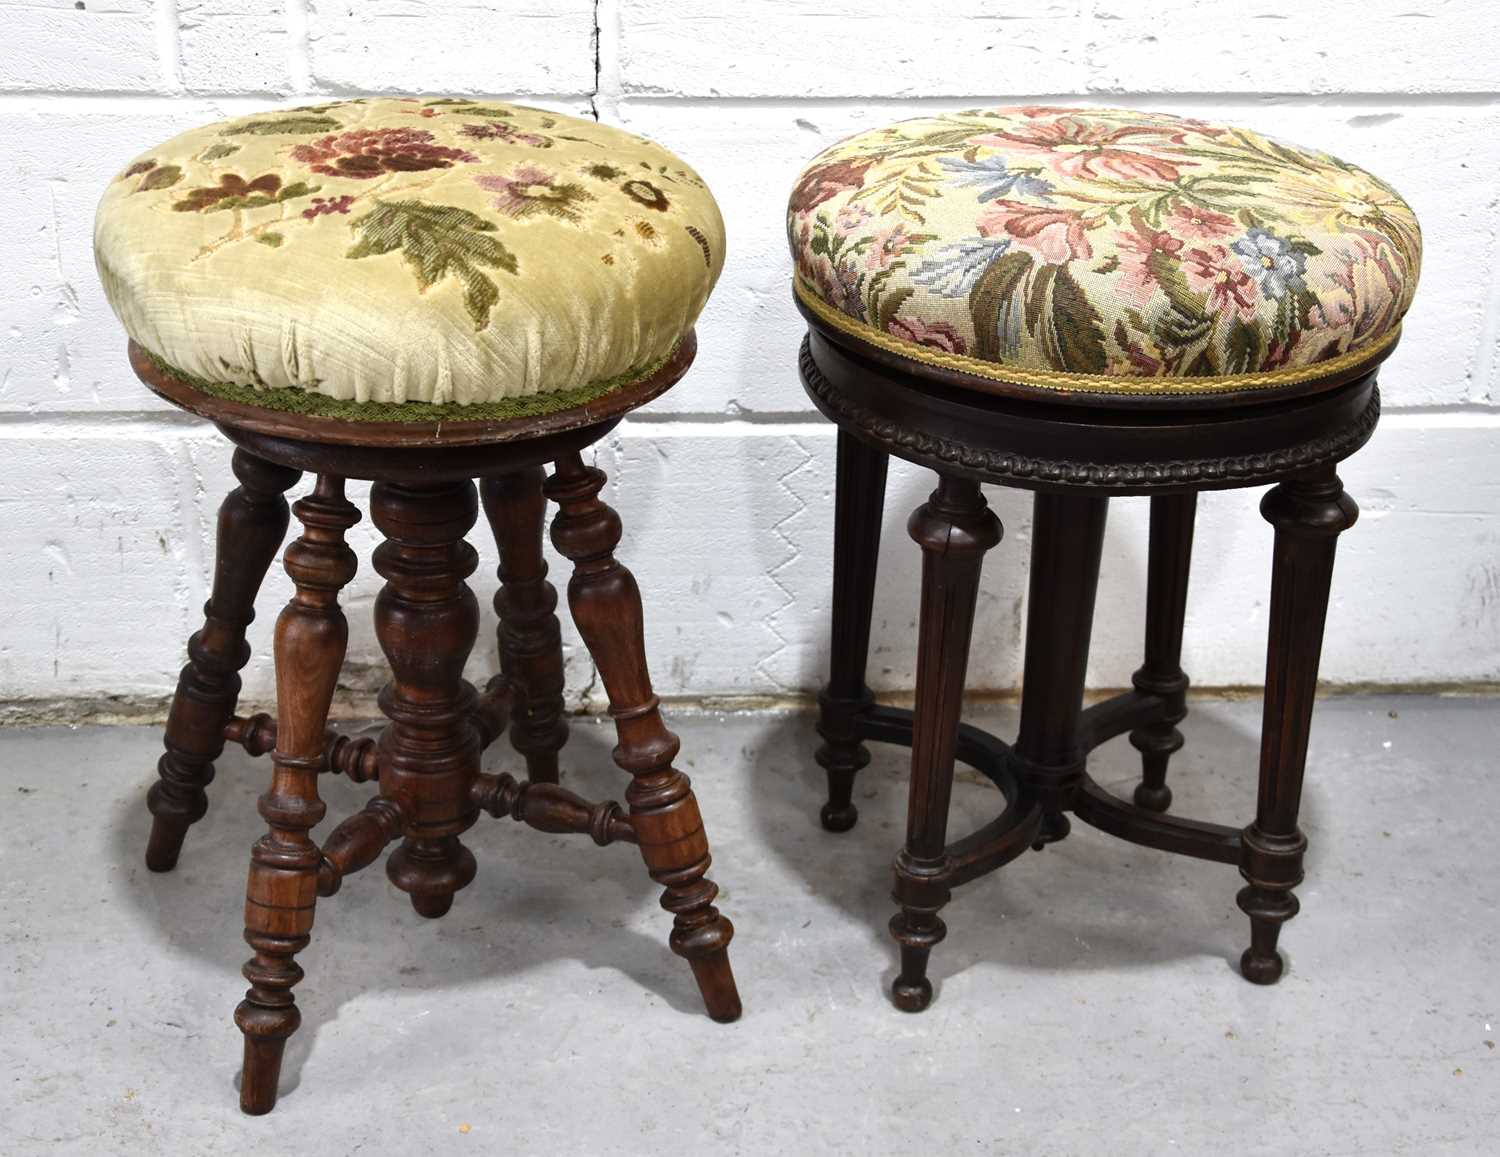 Two antique stools, one in oak having turned spindle legs and central column, both with